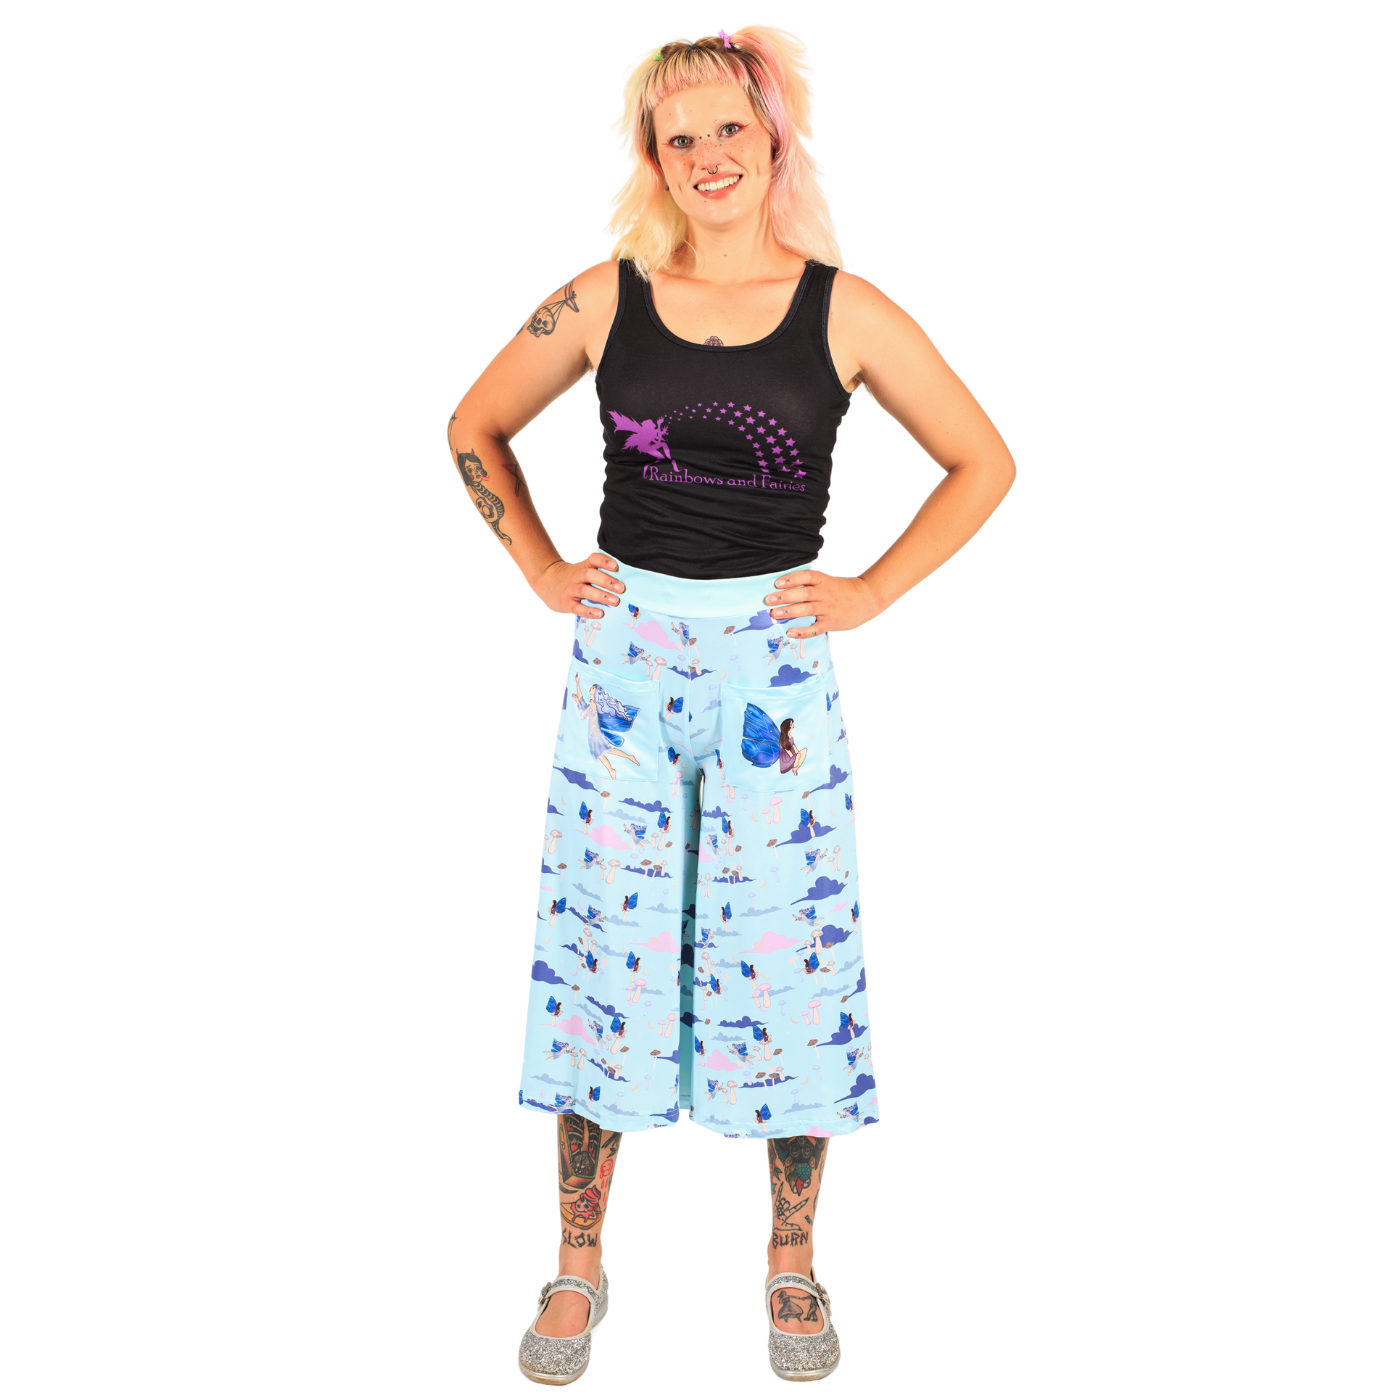 Fairy Garden Culottes by RainbowsAndFairies.com (Fairies - Toadstool - Pastel - 3 Quarter Pants - Rockabilly - Vintage Inspired) - SKU: CL_CULTS_FAIRY_ORG - Pic 02